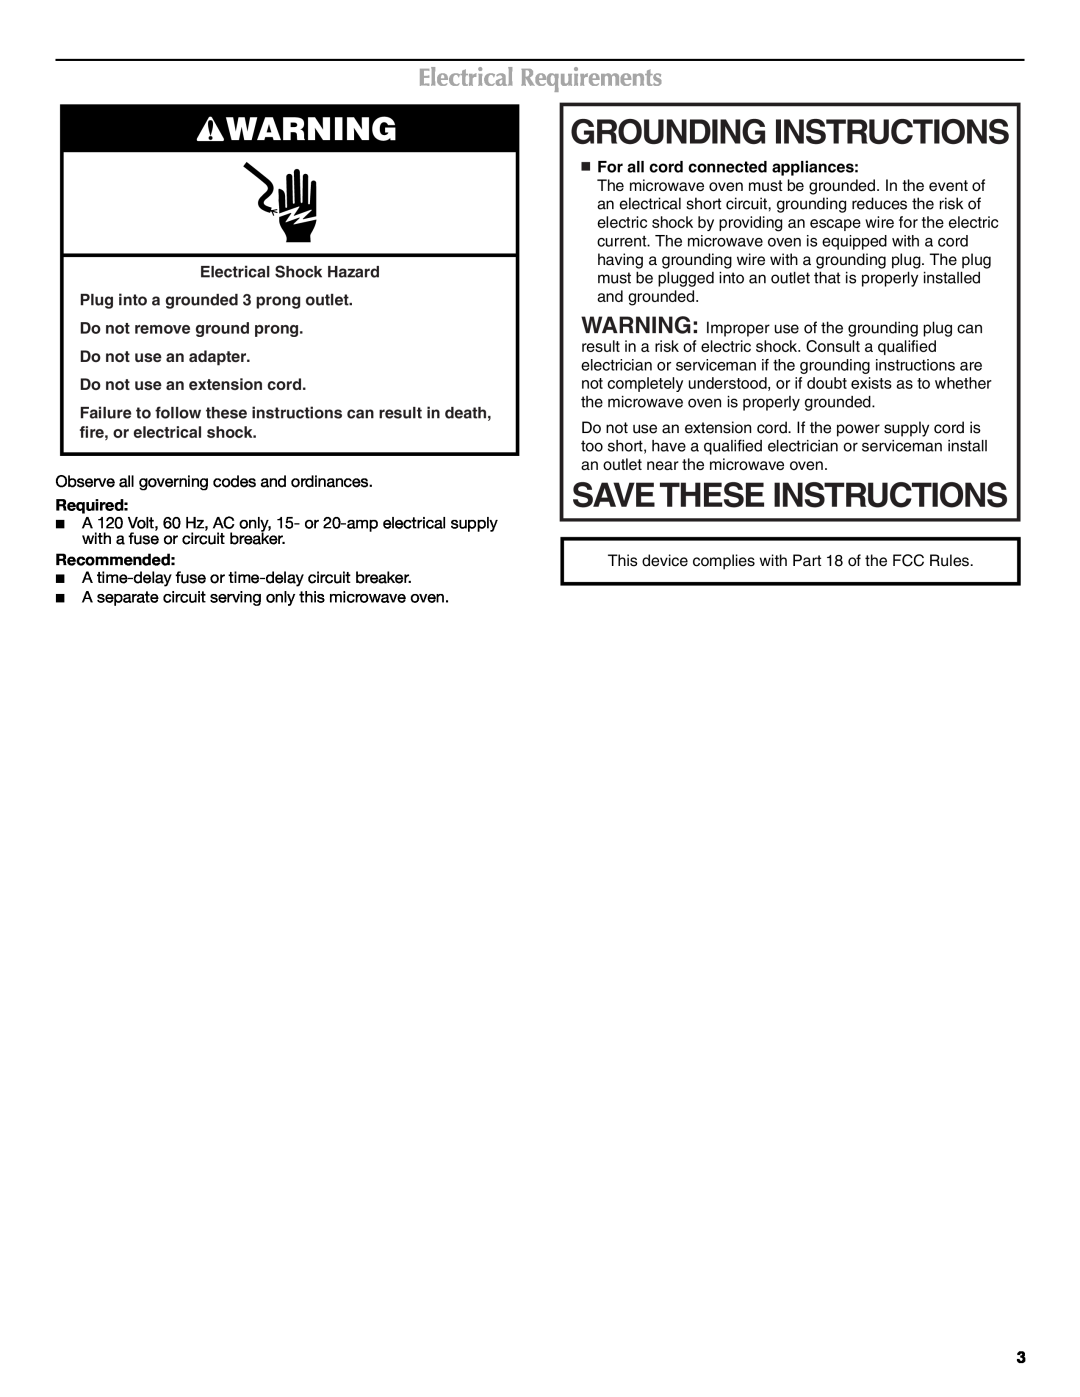 Maytag W10336691A Grounding Instructions, Electrical Requirements, Save These Instructions, Do not use an extension cord 